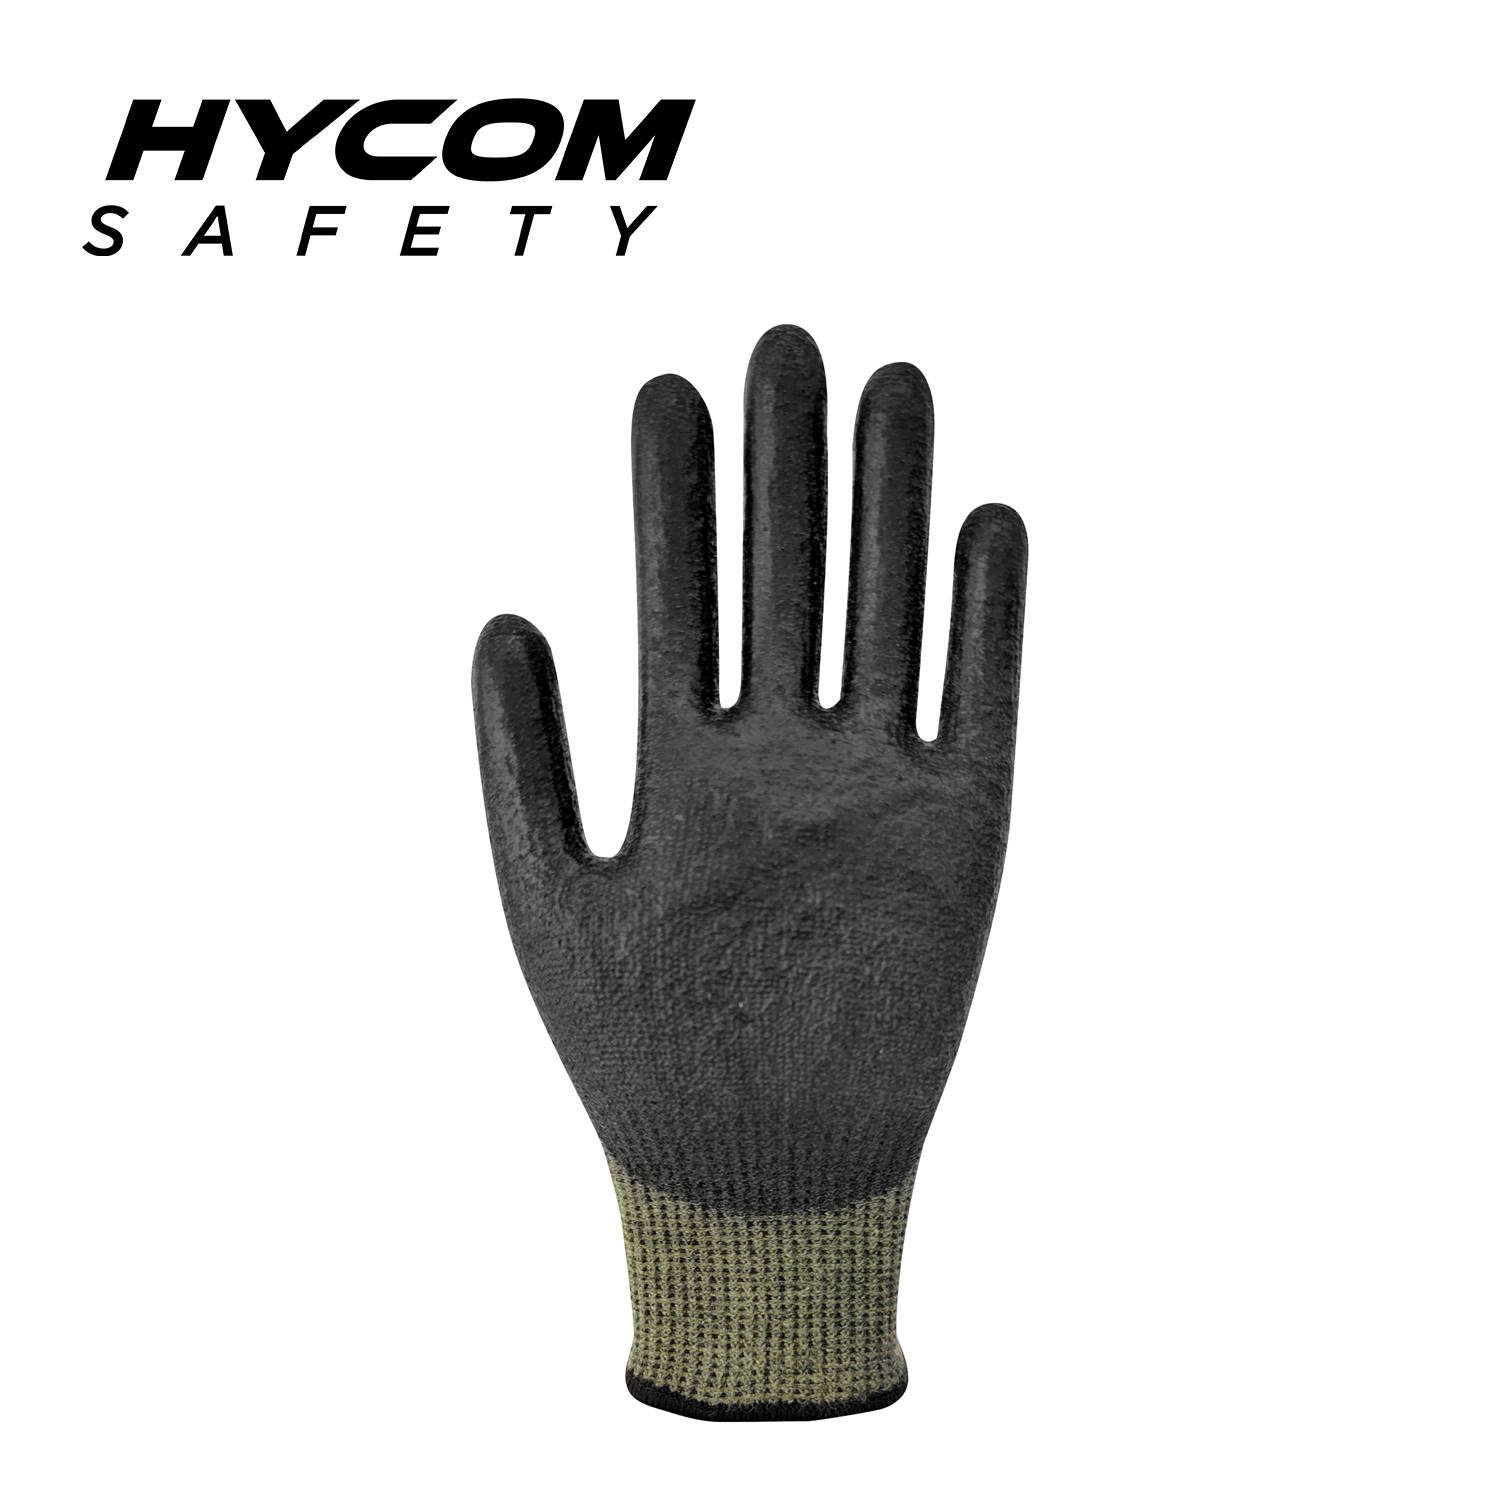 HYCOM 13G ANSI 9 Cut Resistant Glove with Palm PU Coating PPE Gloves